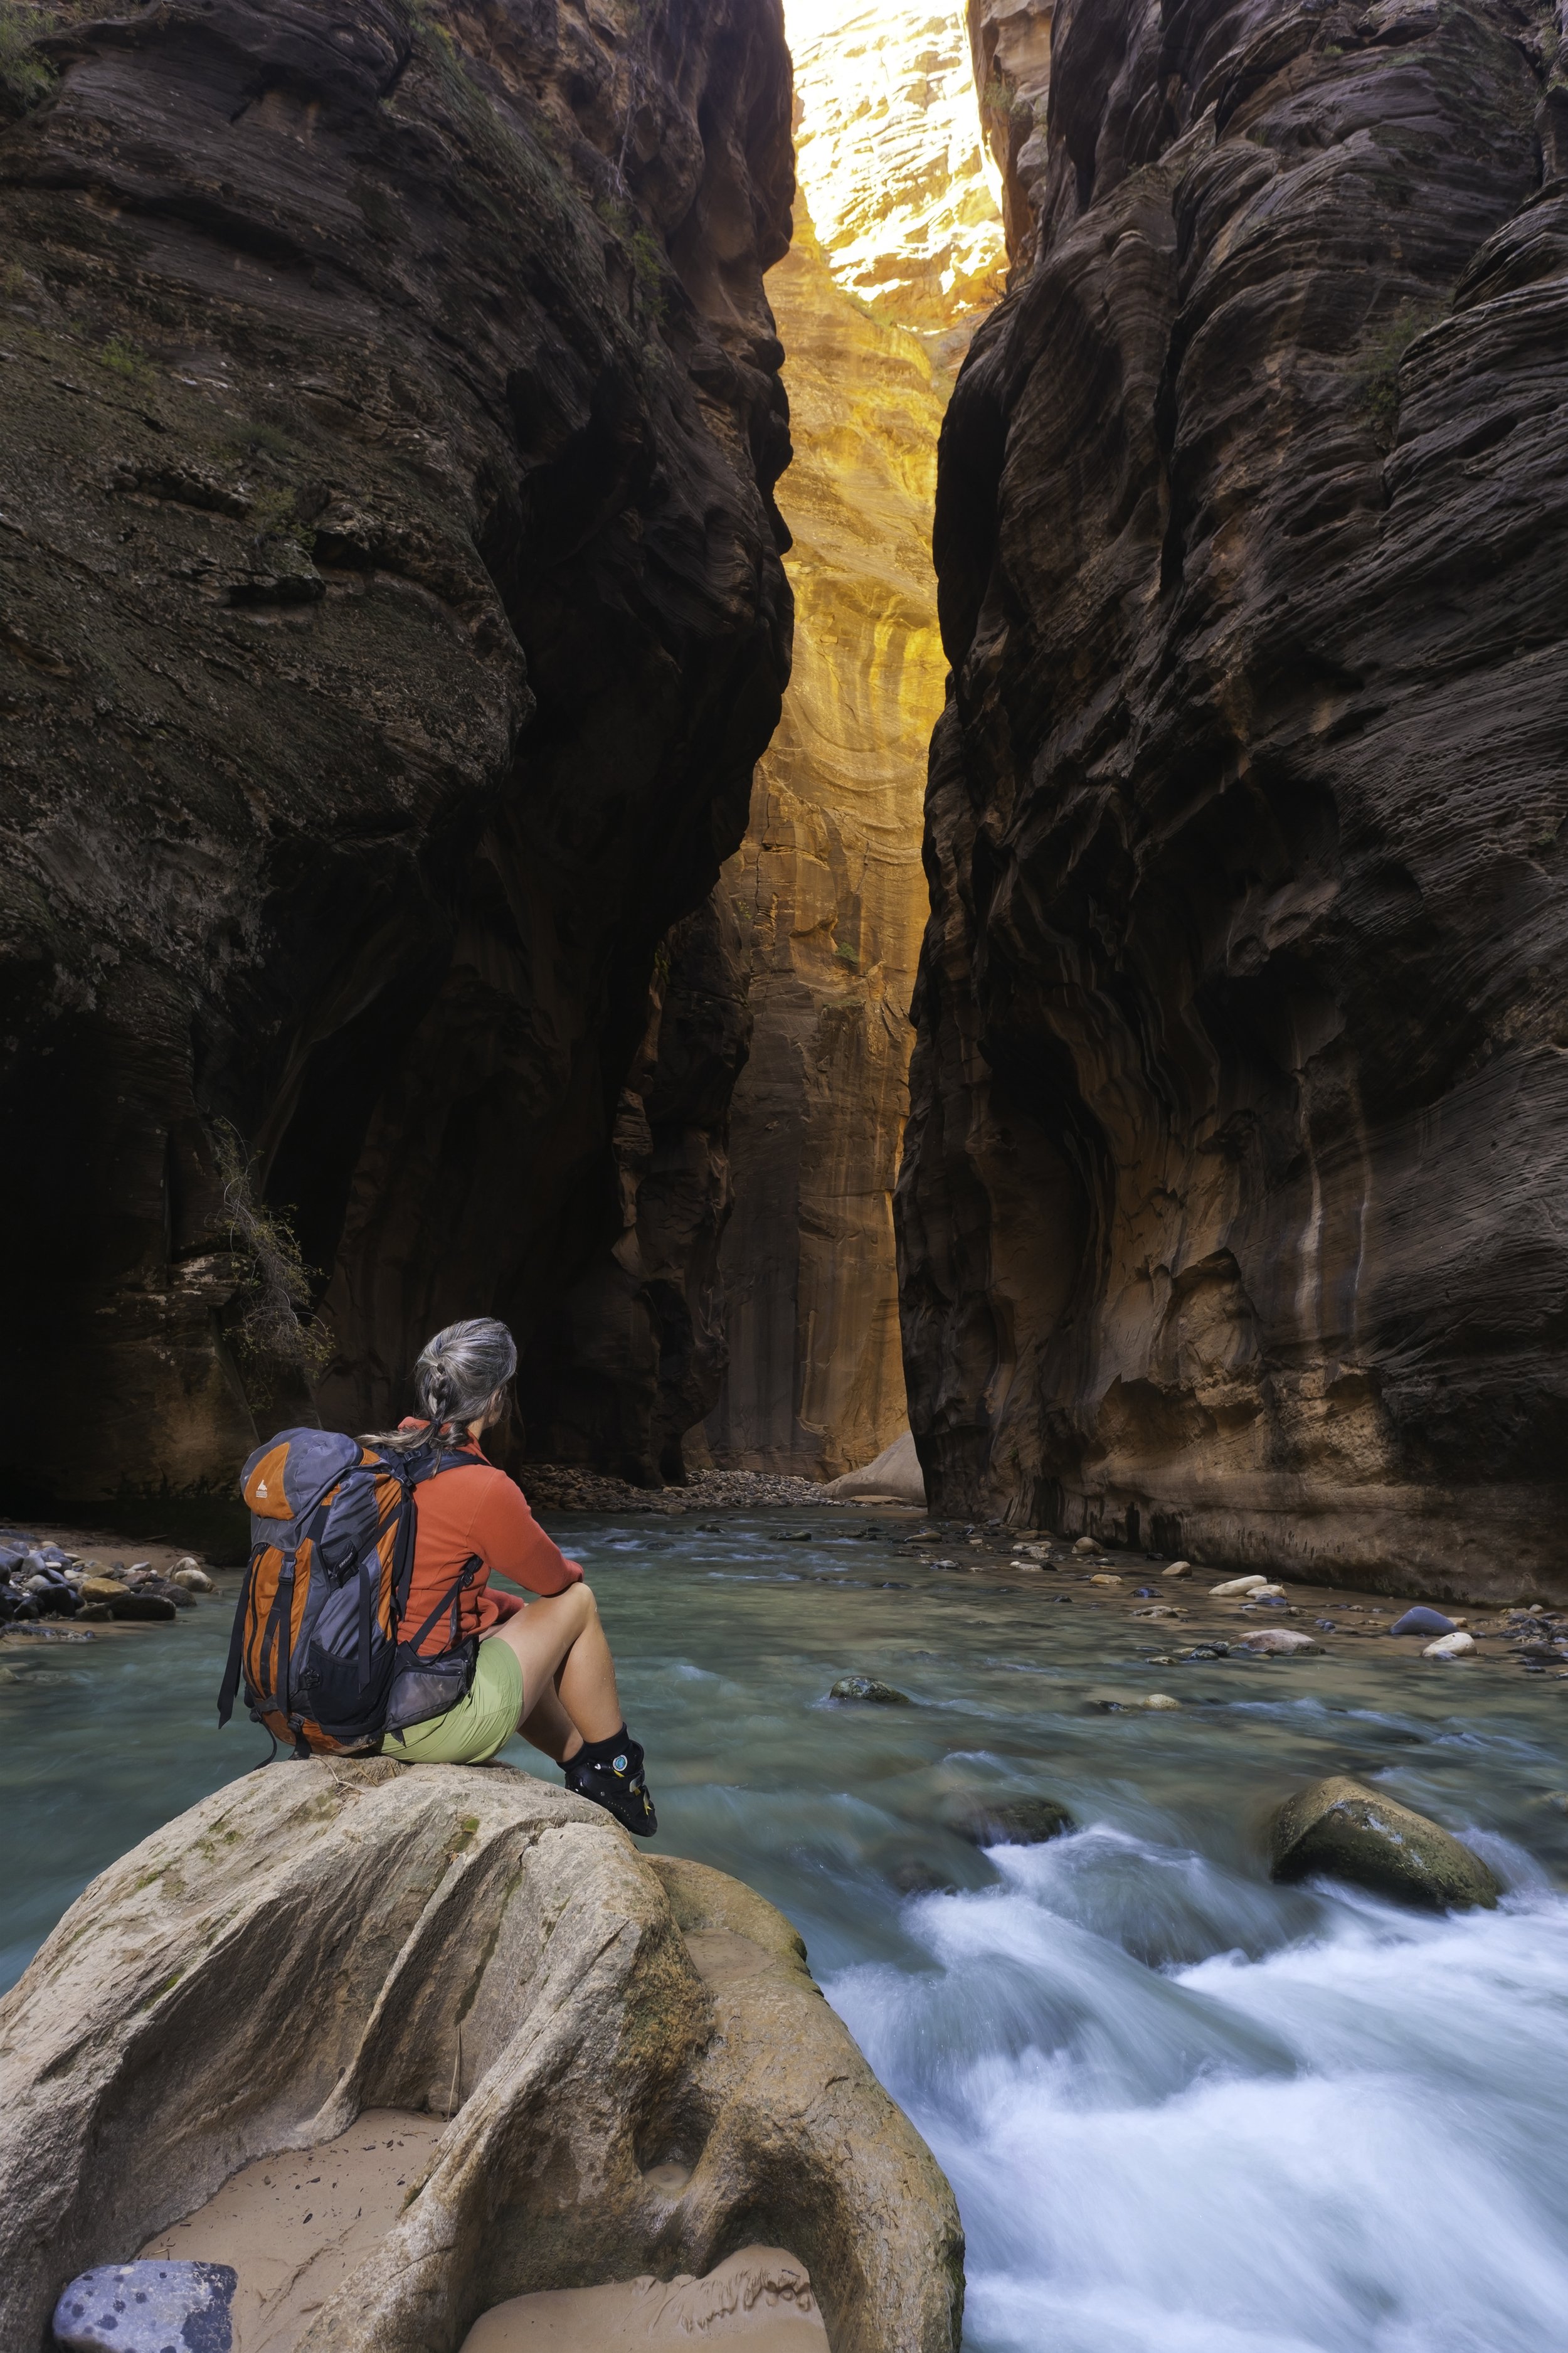 A hiker contemplates the beauty of the Zion Narrows. (Copy)